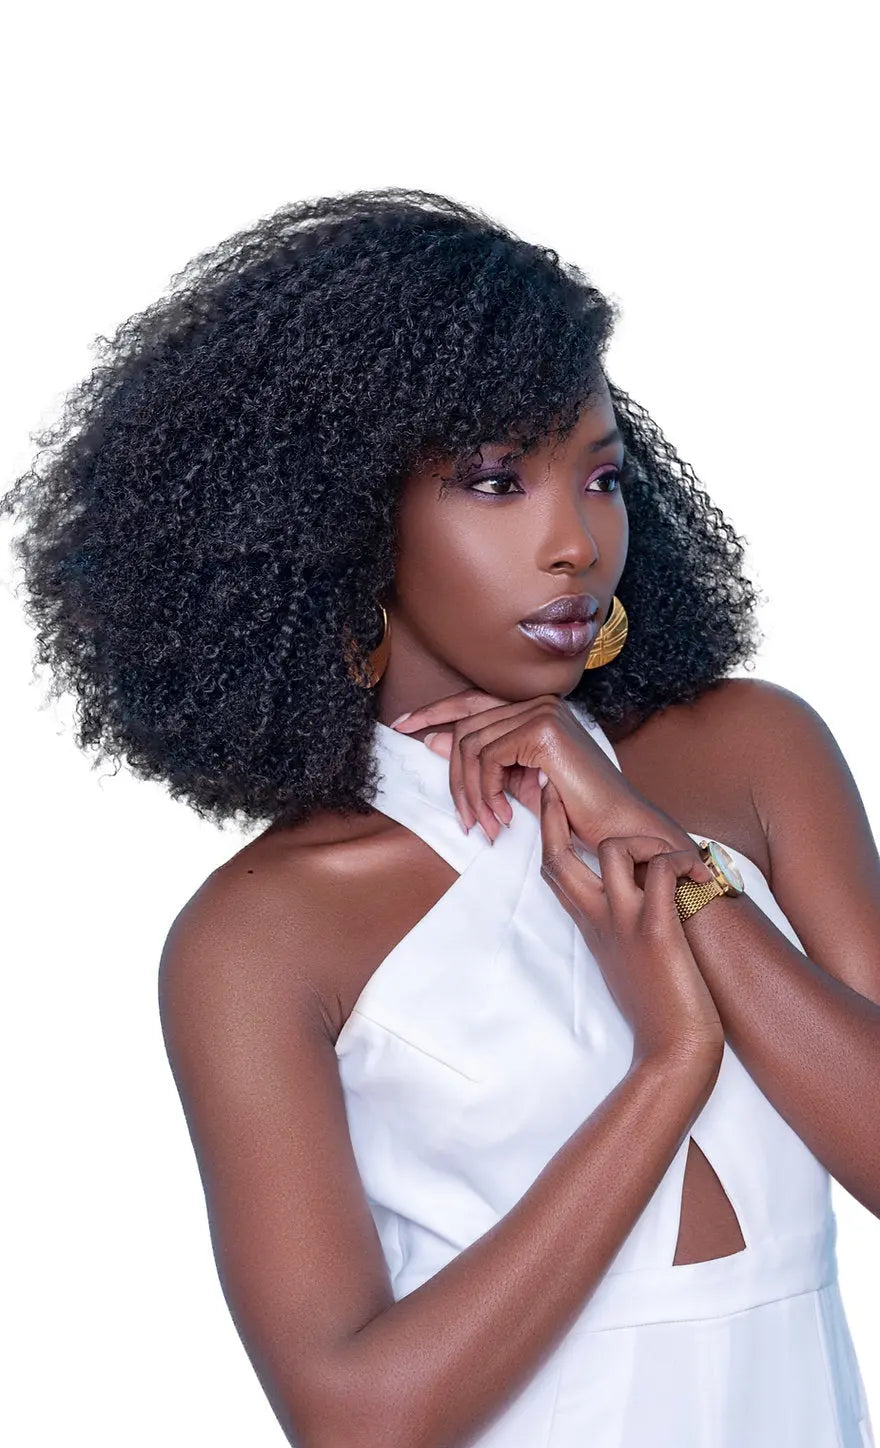 Jasmine Coil -  Natural Hair Extensions True and Pure Texture